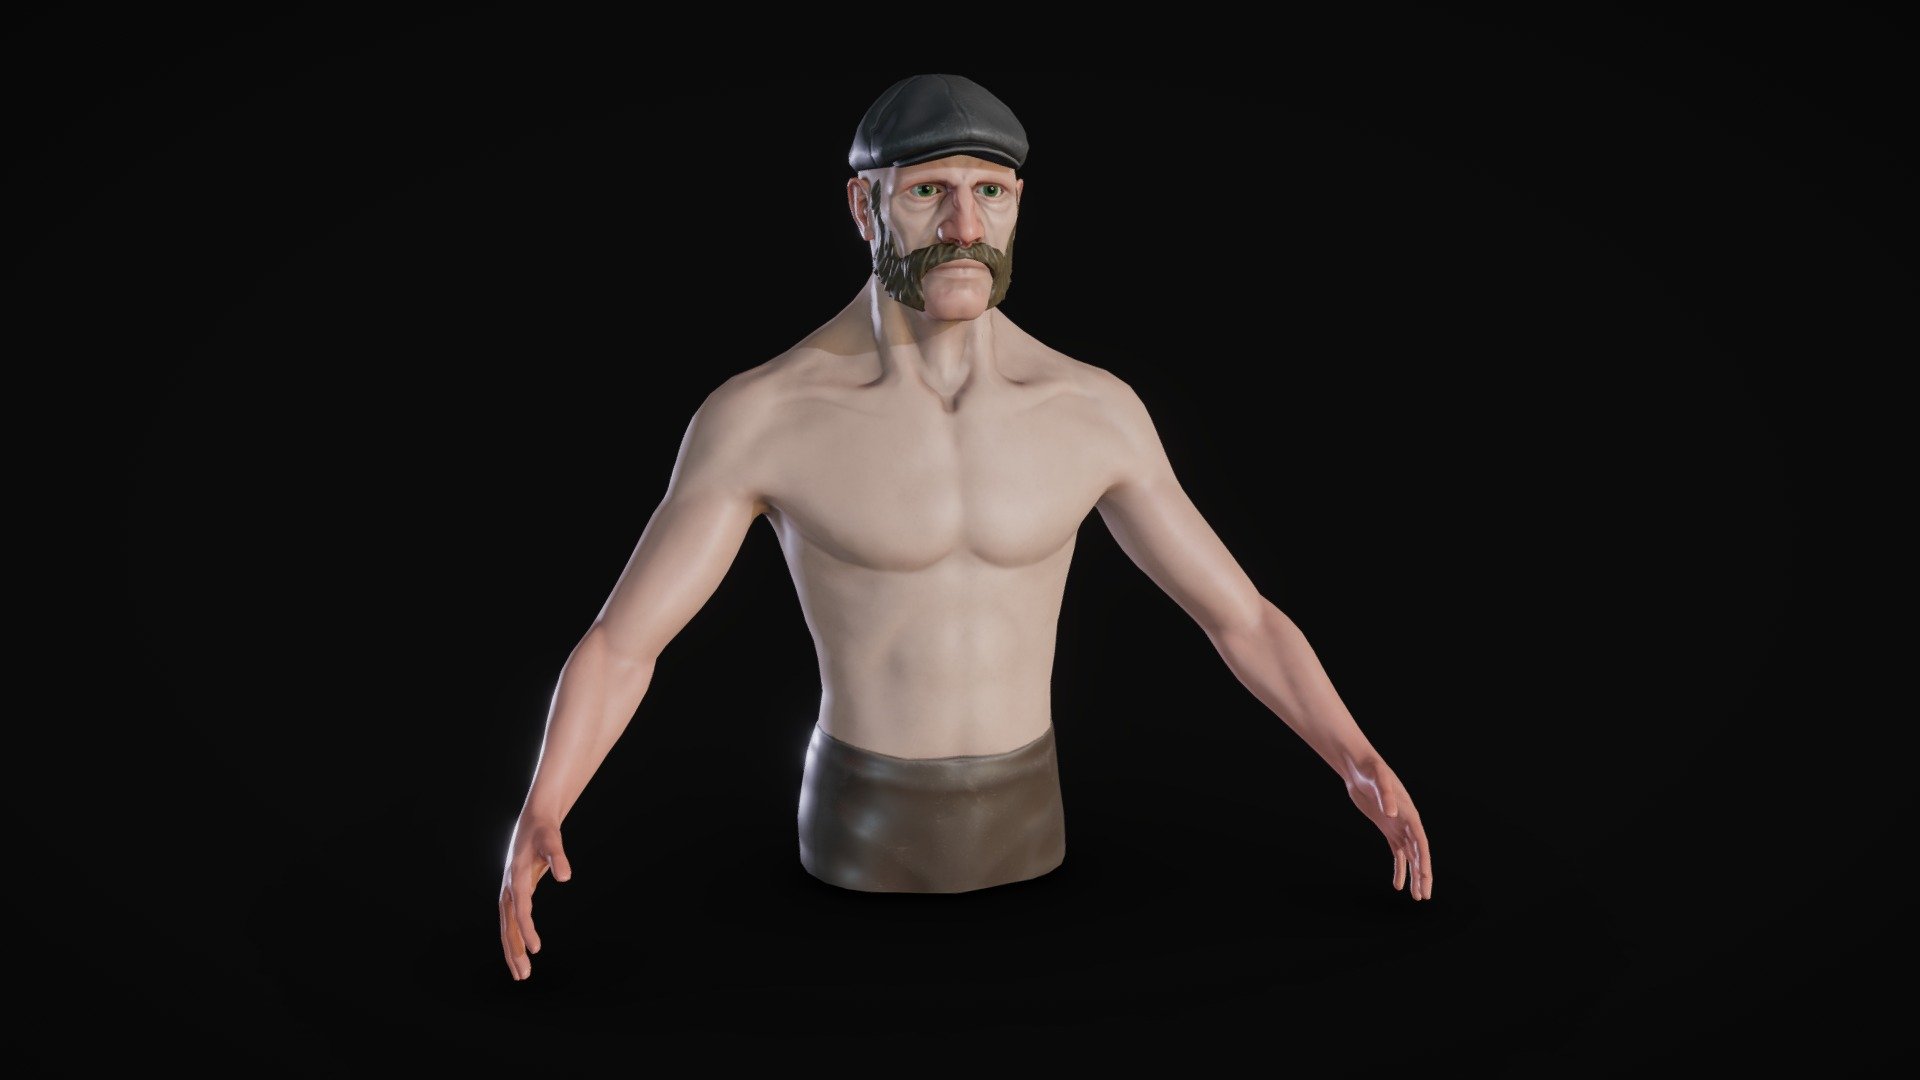 Low Poly Stylized Character Sculpt